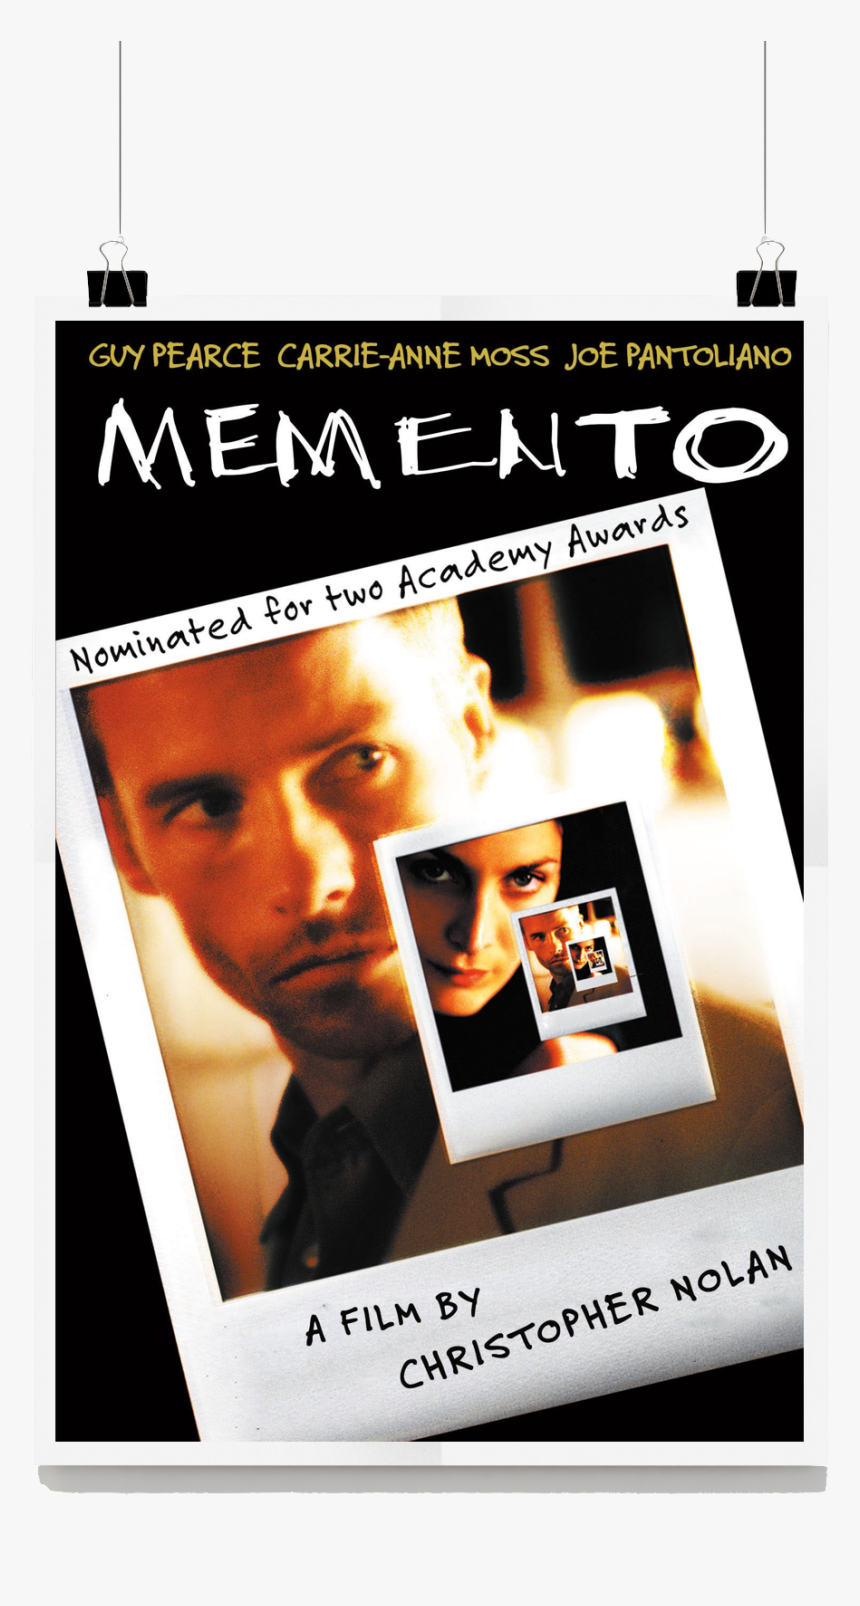 223-2235481_official-memento-poster-hd-hd-png-download.png